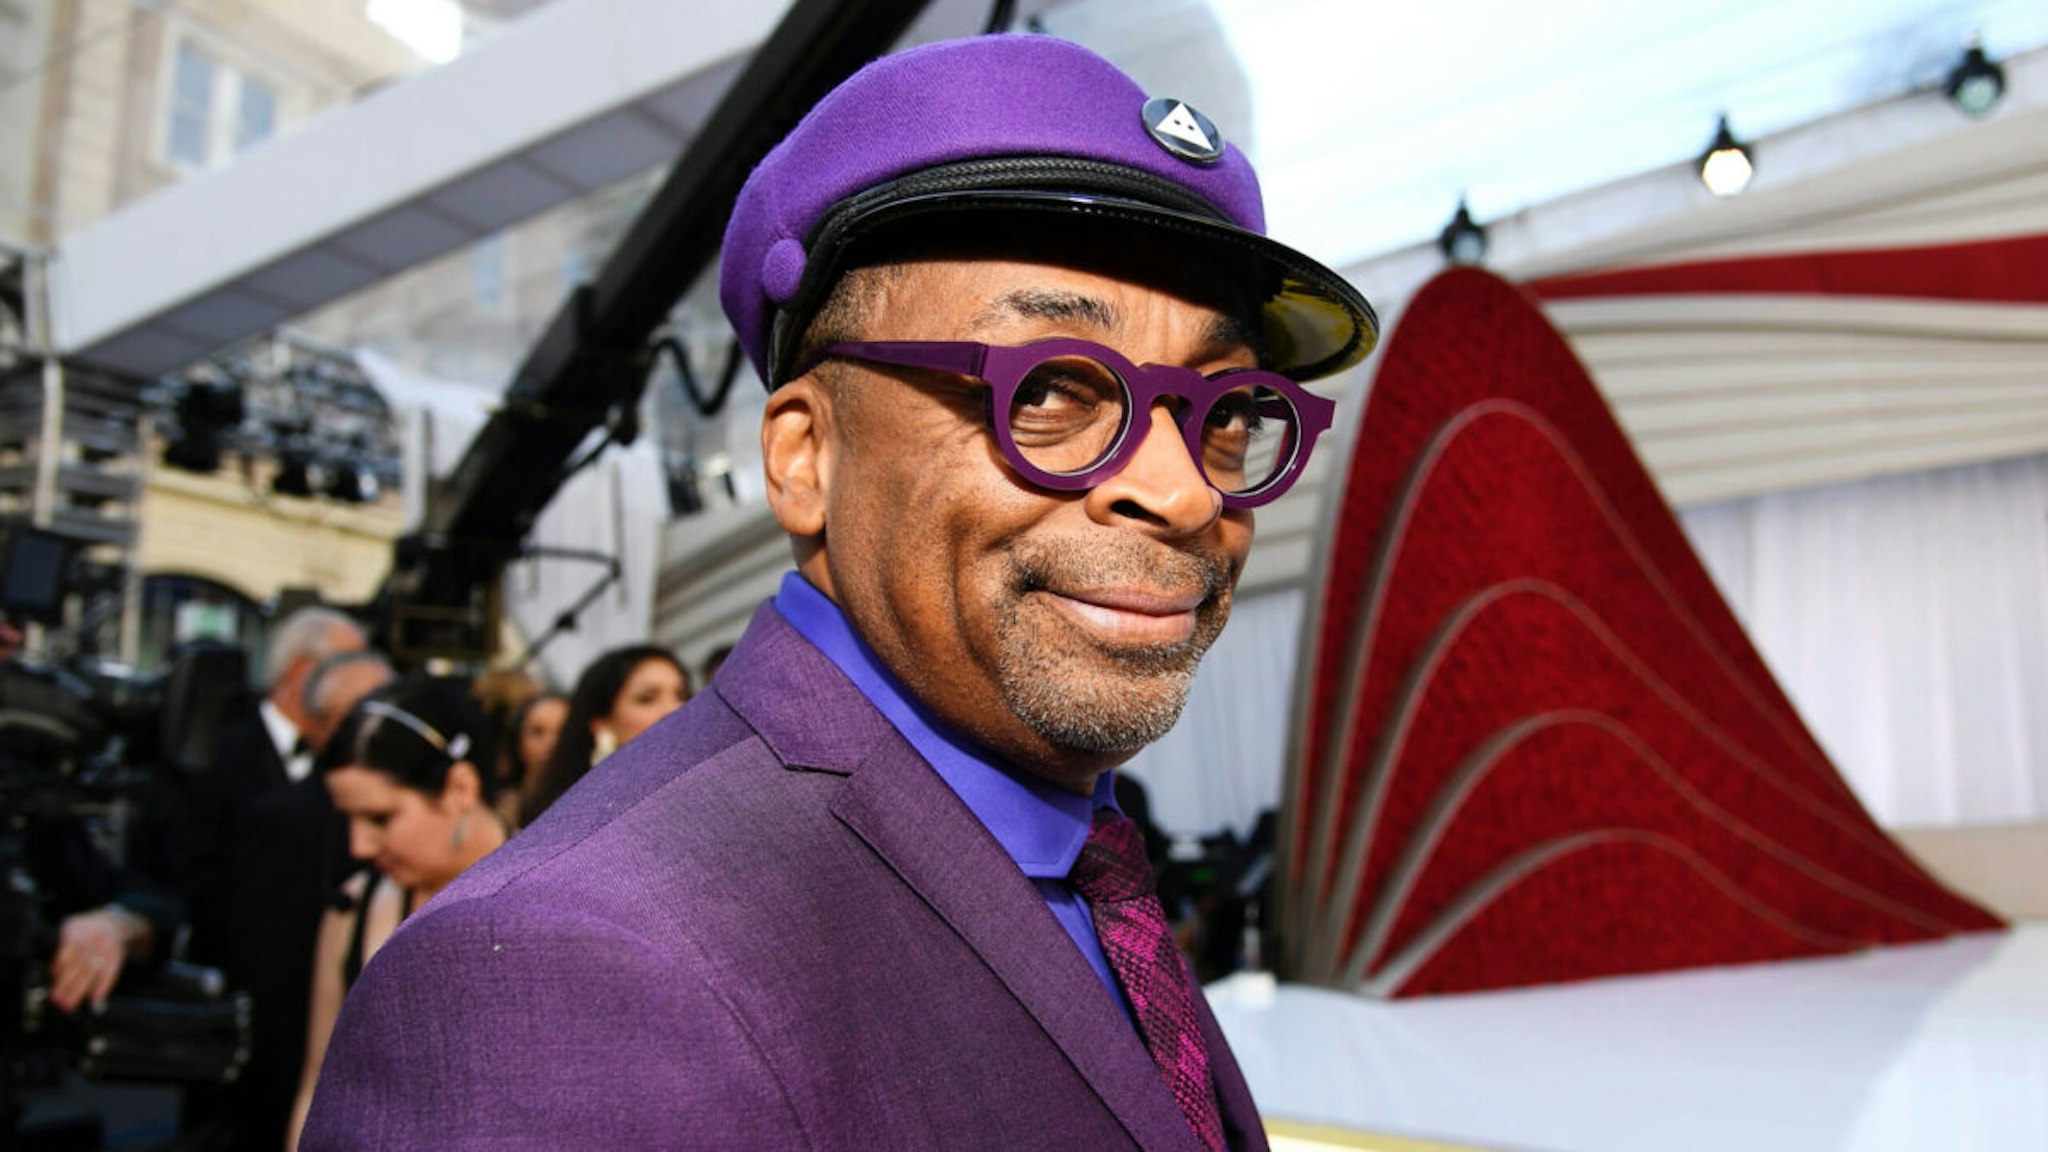 Spike Lee attends the 91st Annual Academy Awards at Hollywood and Highland on February 24, 2019 in Hollywood, California.